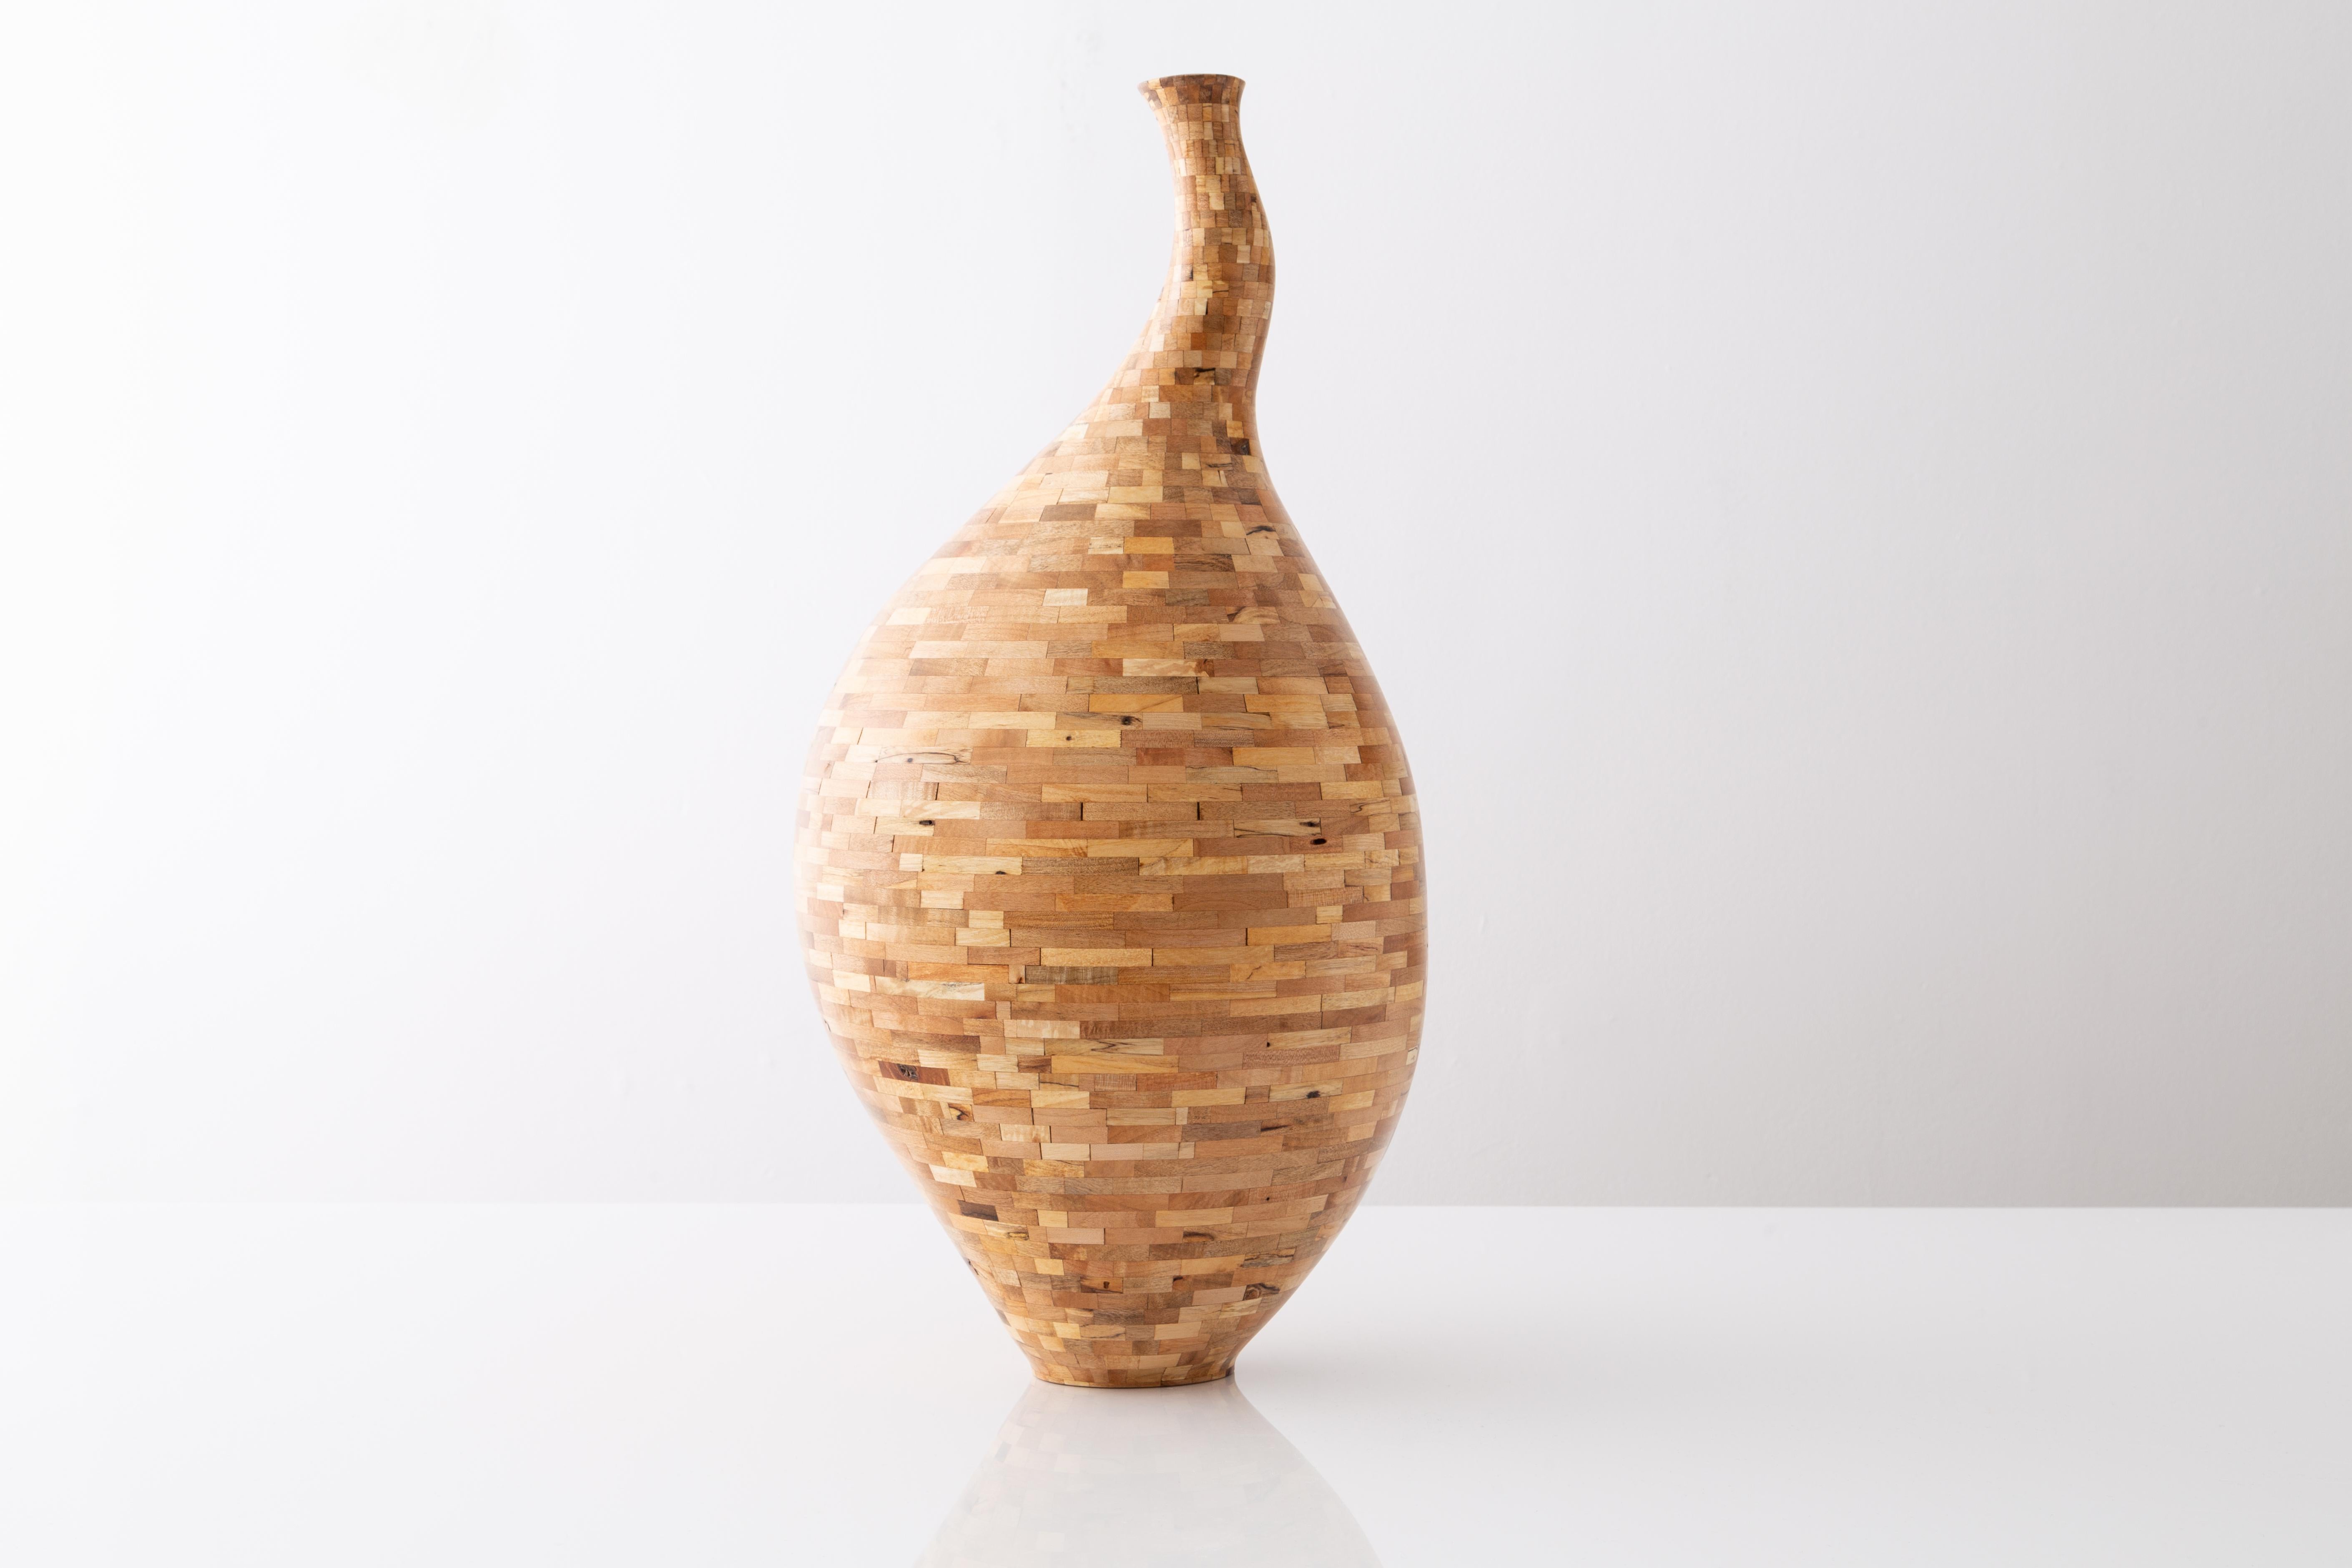 Contemporary Spalted Maple Goose Neck Vase #1 by Richard Haining, Available Now (Moderne)